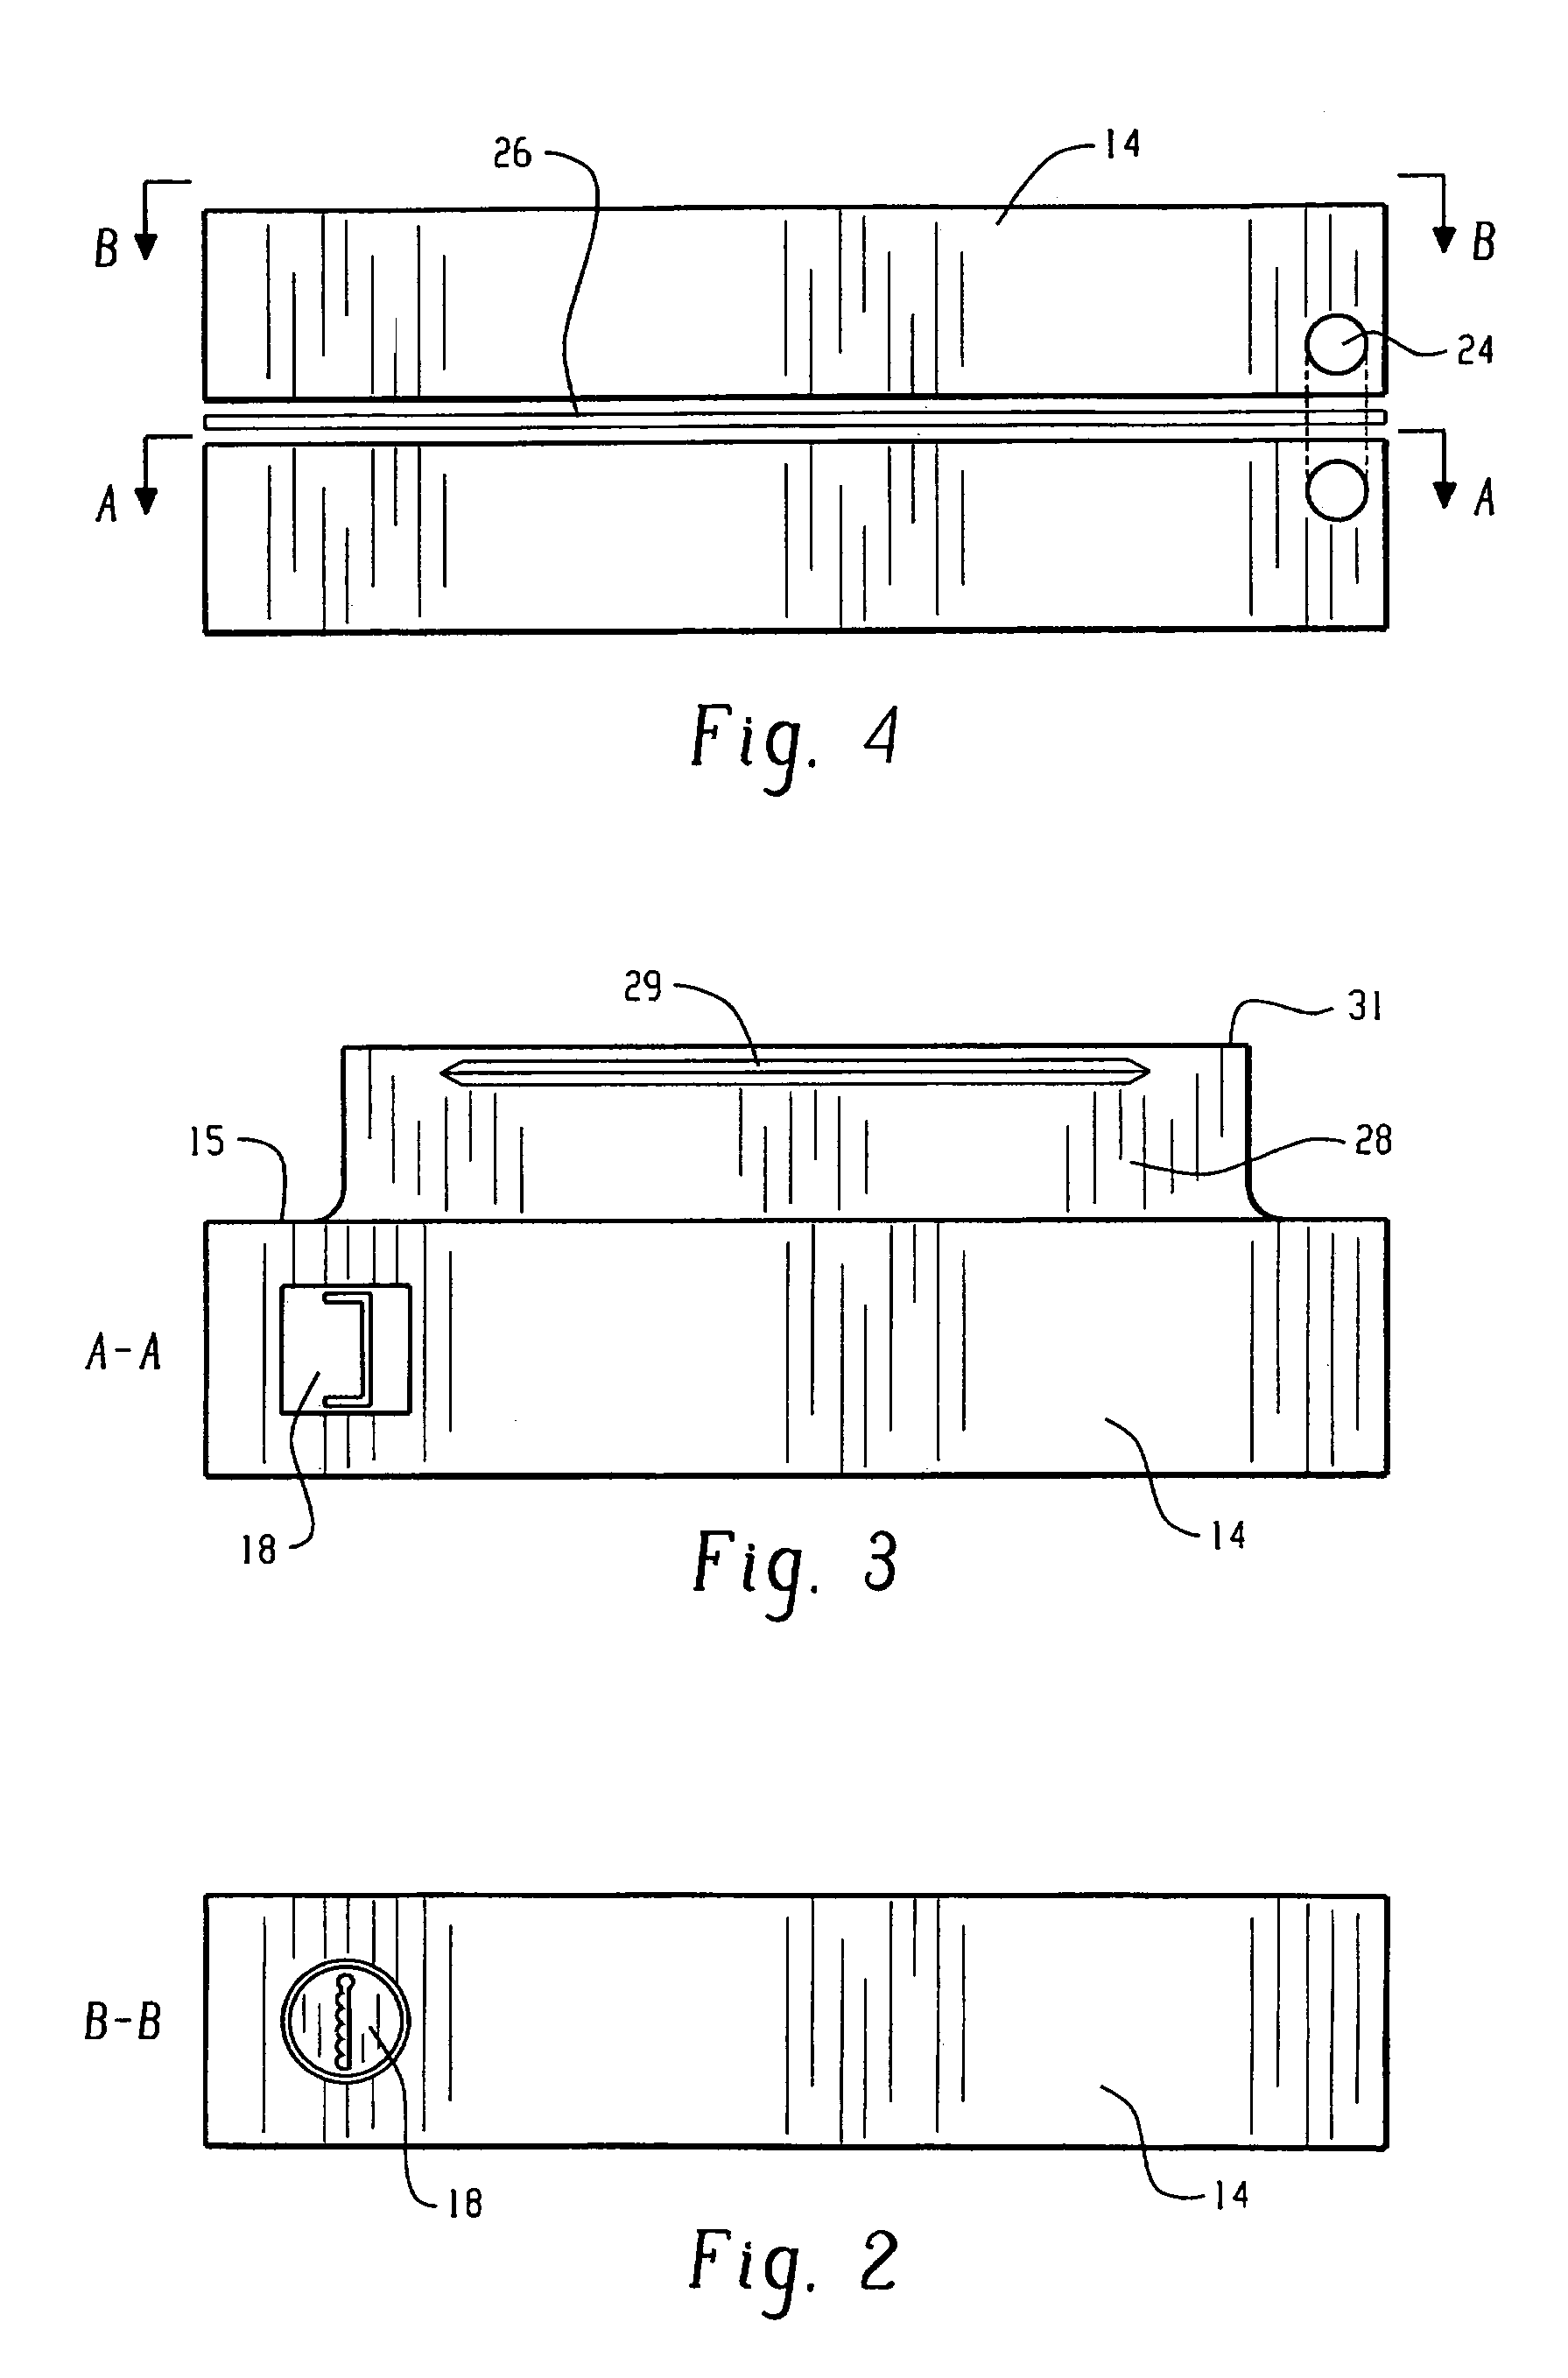 Physical security system for wireless access points that prevents removal of the access point and associated connectors